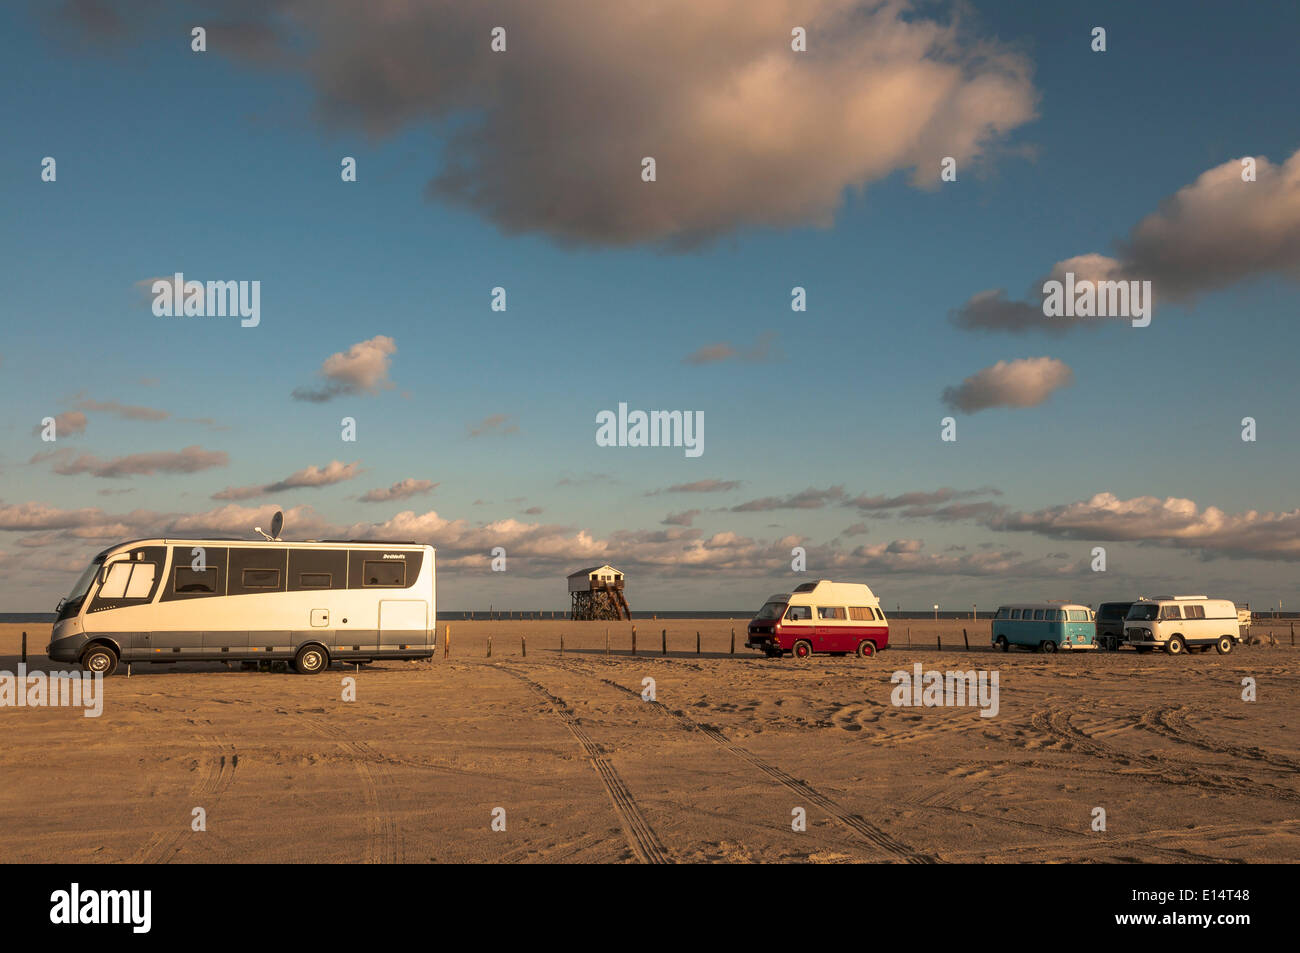 Campers on a beach parking site in the morning light, Sankt Peter-Ording, Eiderstedt, North Frisia, Schleswig-Holstein, Germany Stock Photo